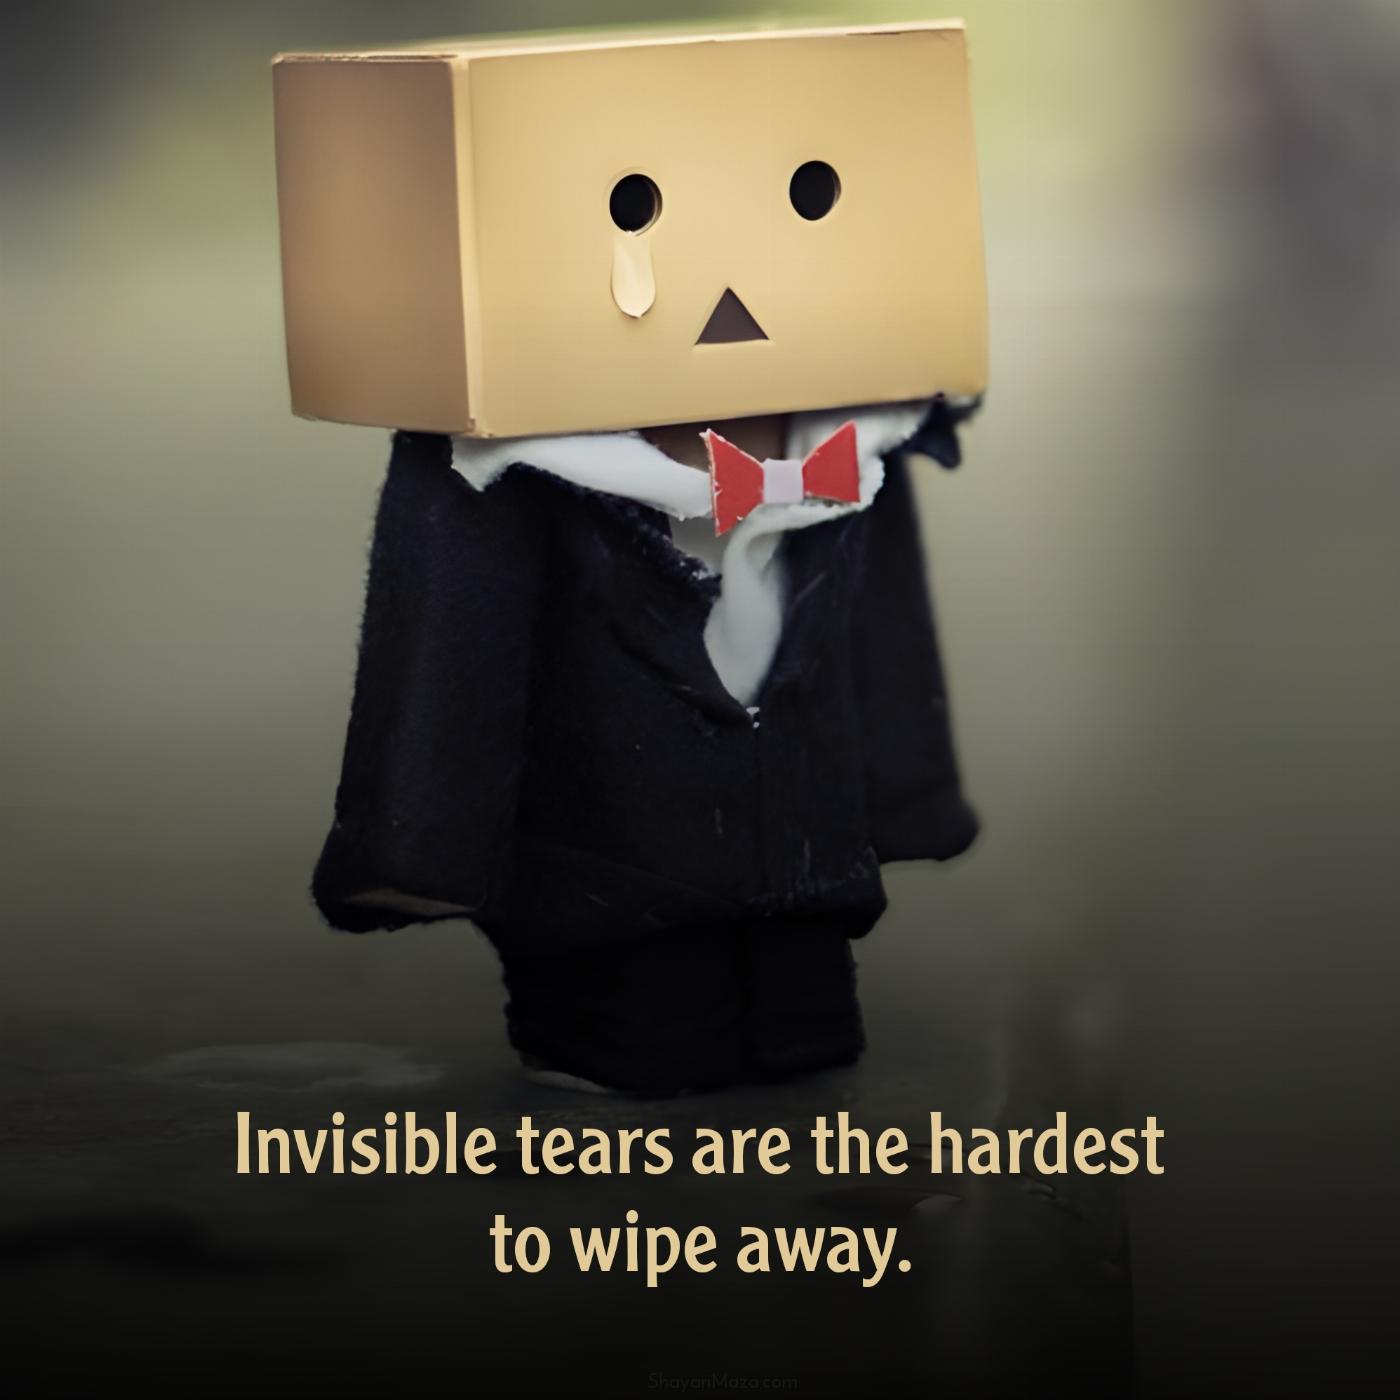 Invisible tears are the hardest to wipe away